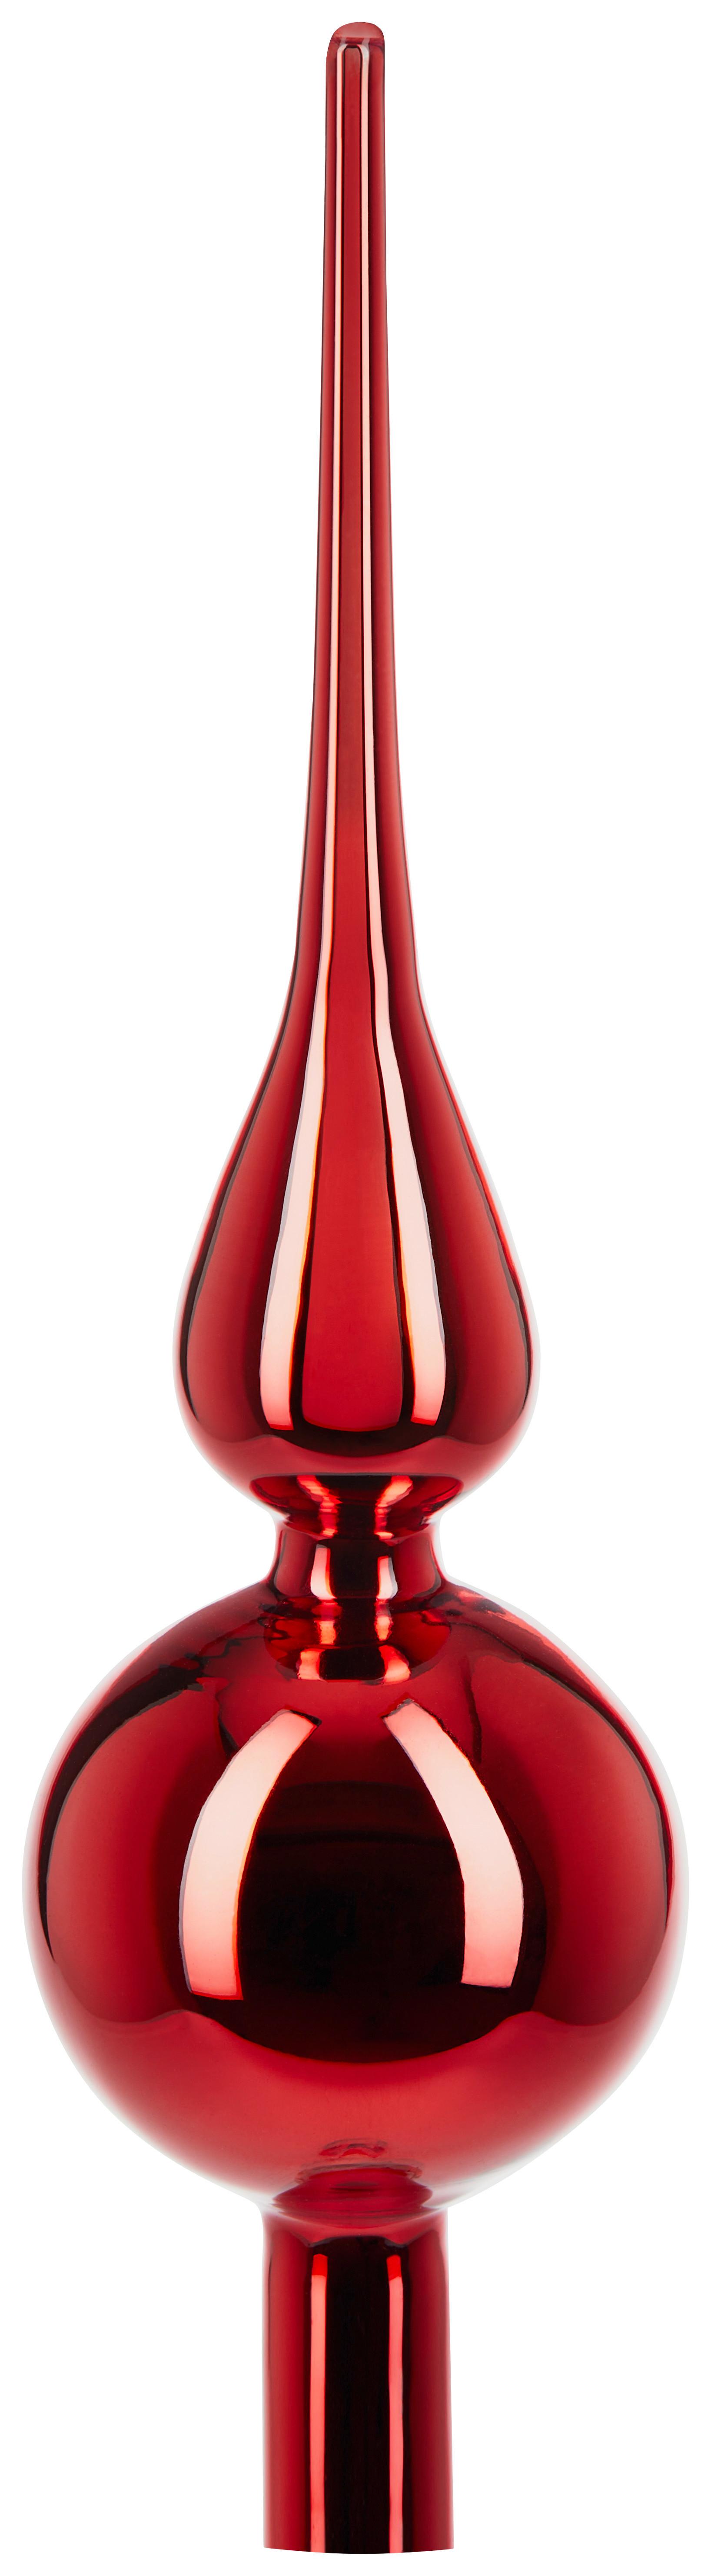 Christbaumspitze Rabia - Rot, KONVENTIONELL, Glas (7/28cm) - Luca Bessoni